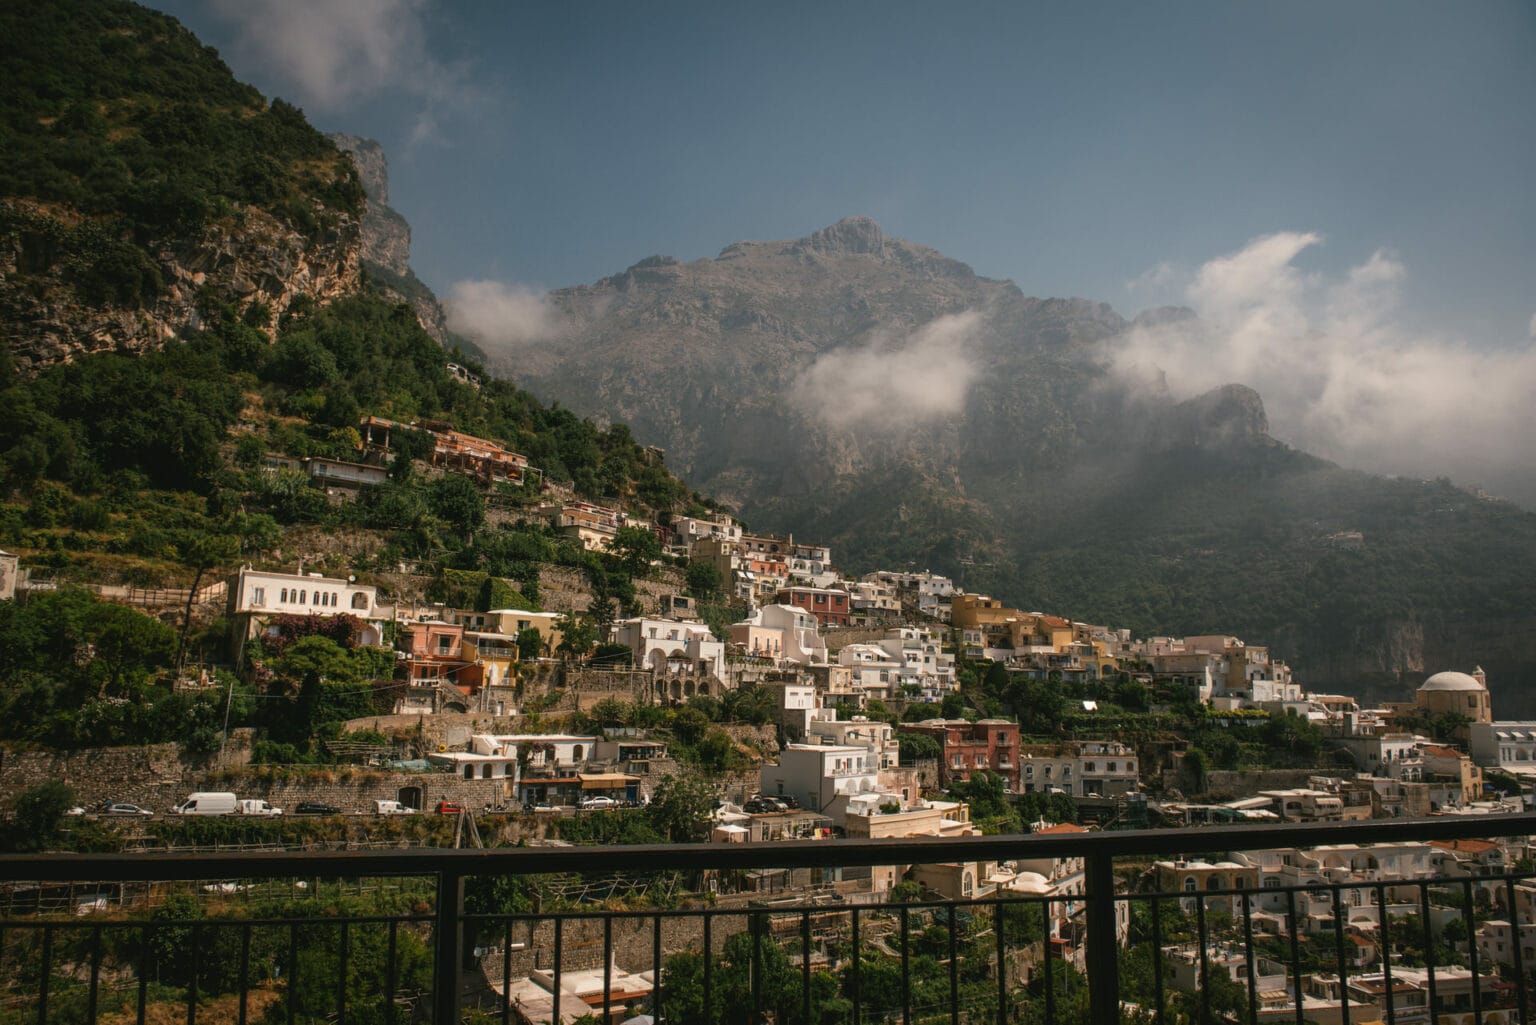 Positano from the road, with the mountains of the Amalfi Coast on a misty morning